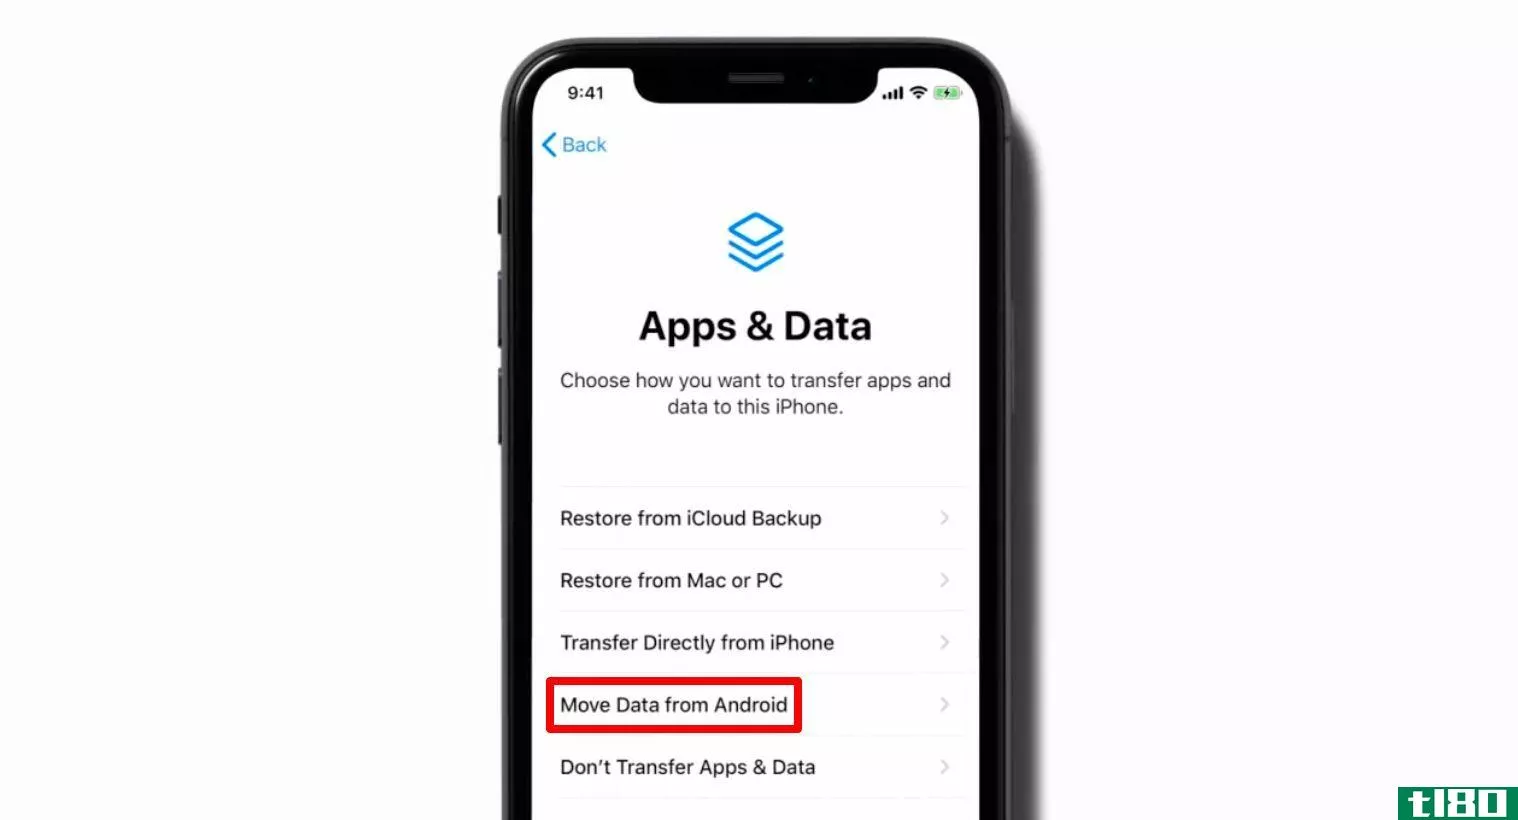 Move Data from Android option in Apps and Data on iPhone